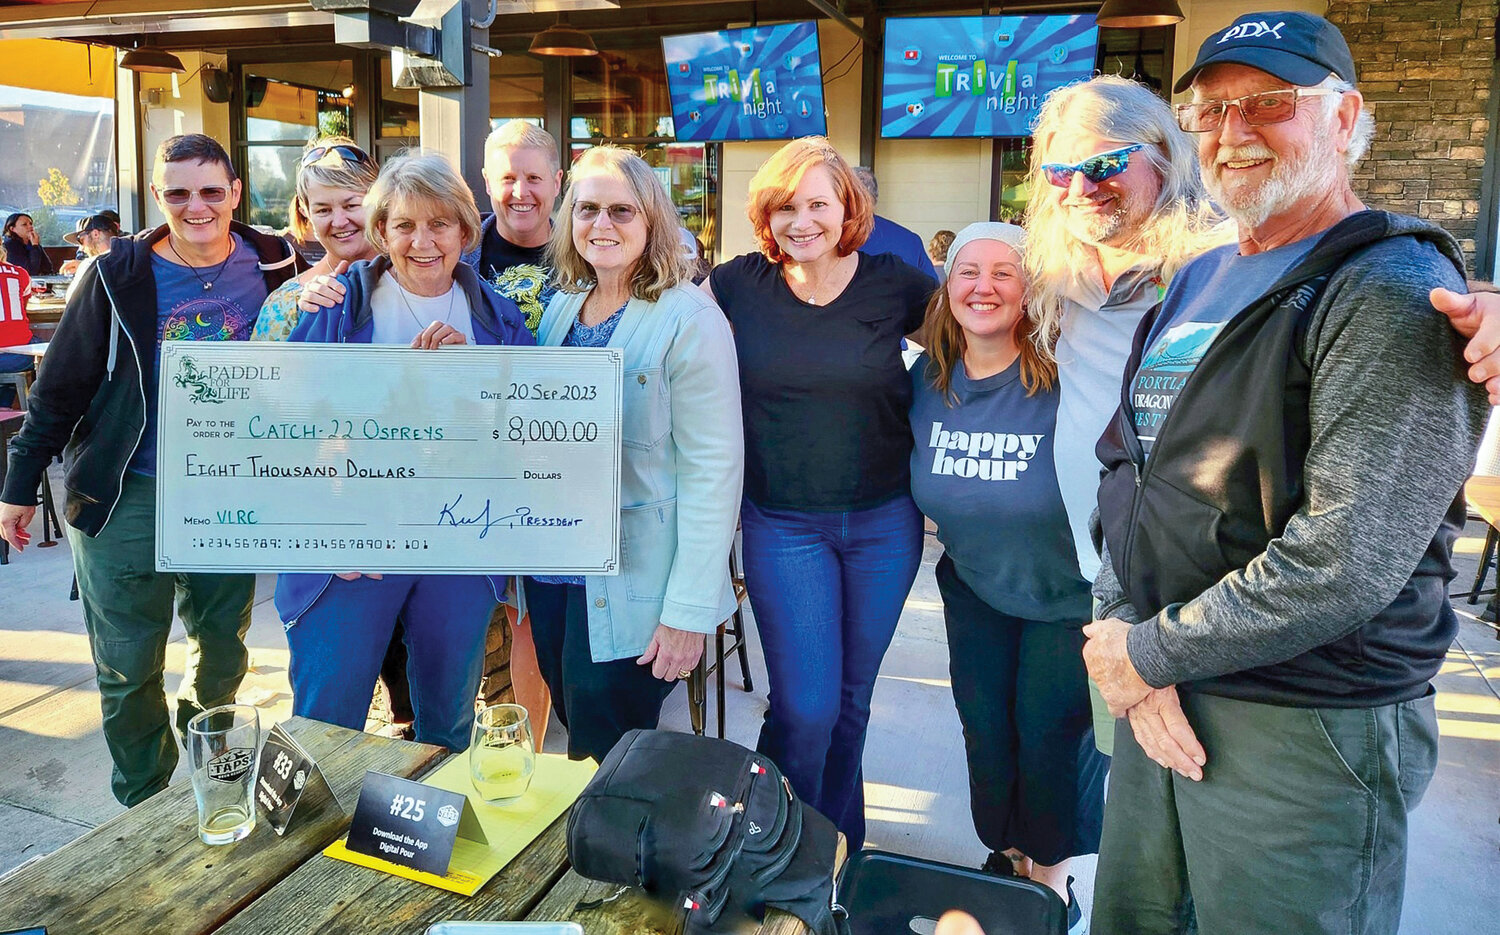 Members of the Catch-22 Breast Cancer Survivors Dragon Boat team are presented with a ceremonial check for $8,000 from Paddle For Life following a fundraiser in Ridgefield last month. The money will be used to build and maintain a breast cancer survivor’s paddling community in southwest Washington, according to a press release.